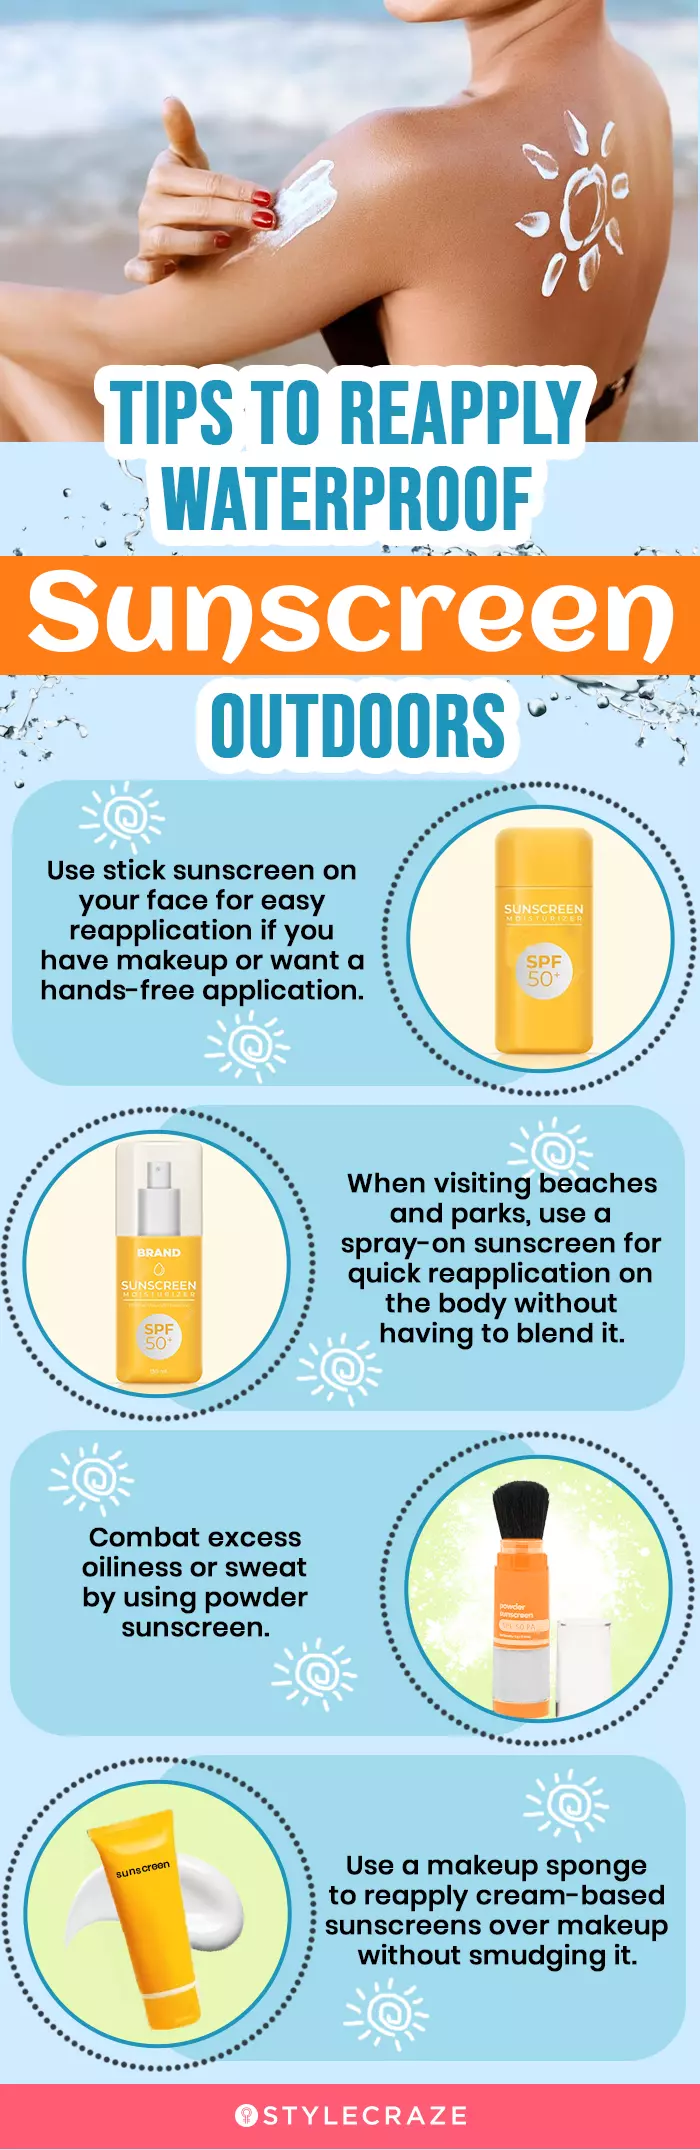 Tips To Reapply Waterproof Sunscreen Outdoors (infographic)